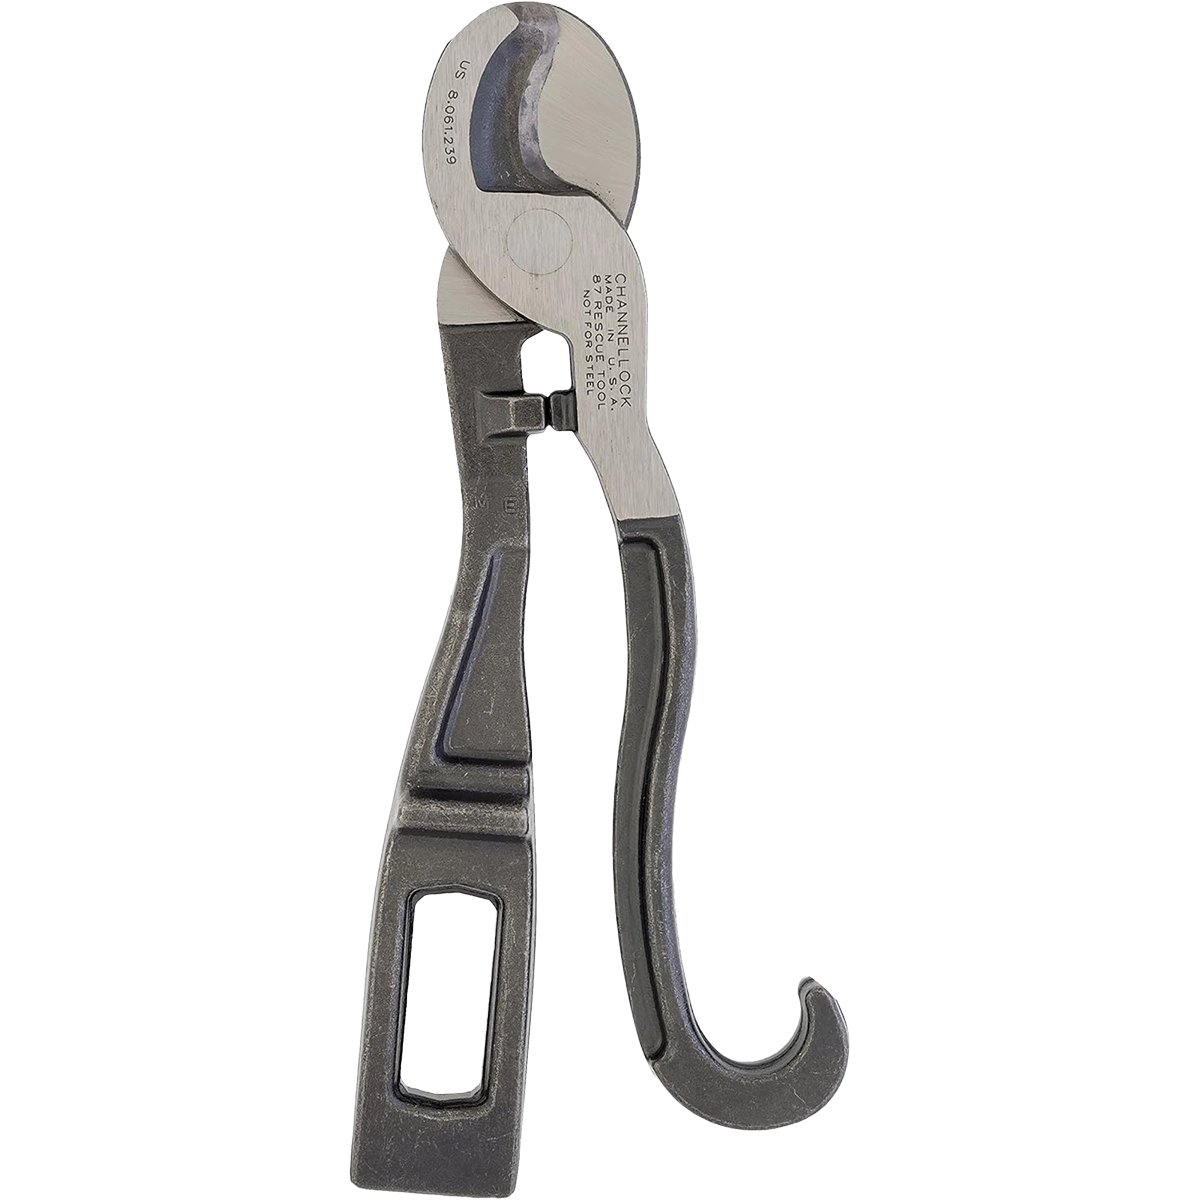 ChannelLock Cutter Rescue Tool Cable Cutter, 9"